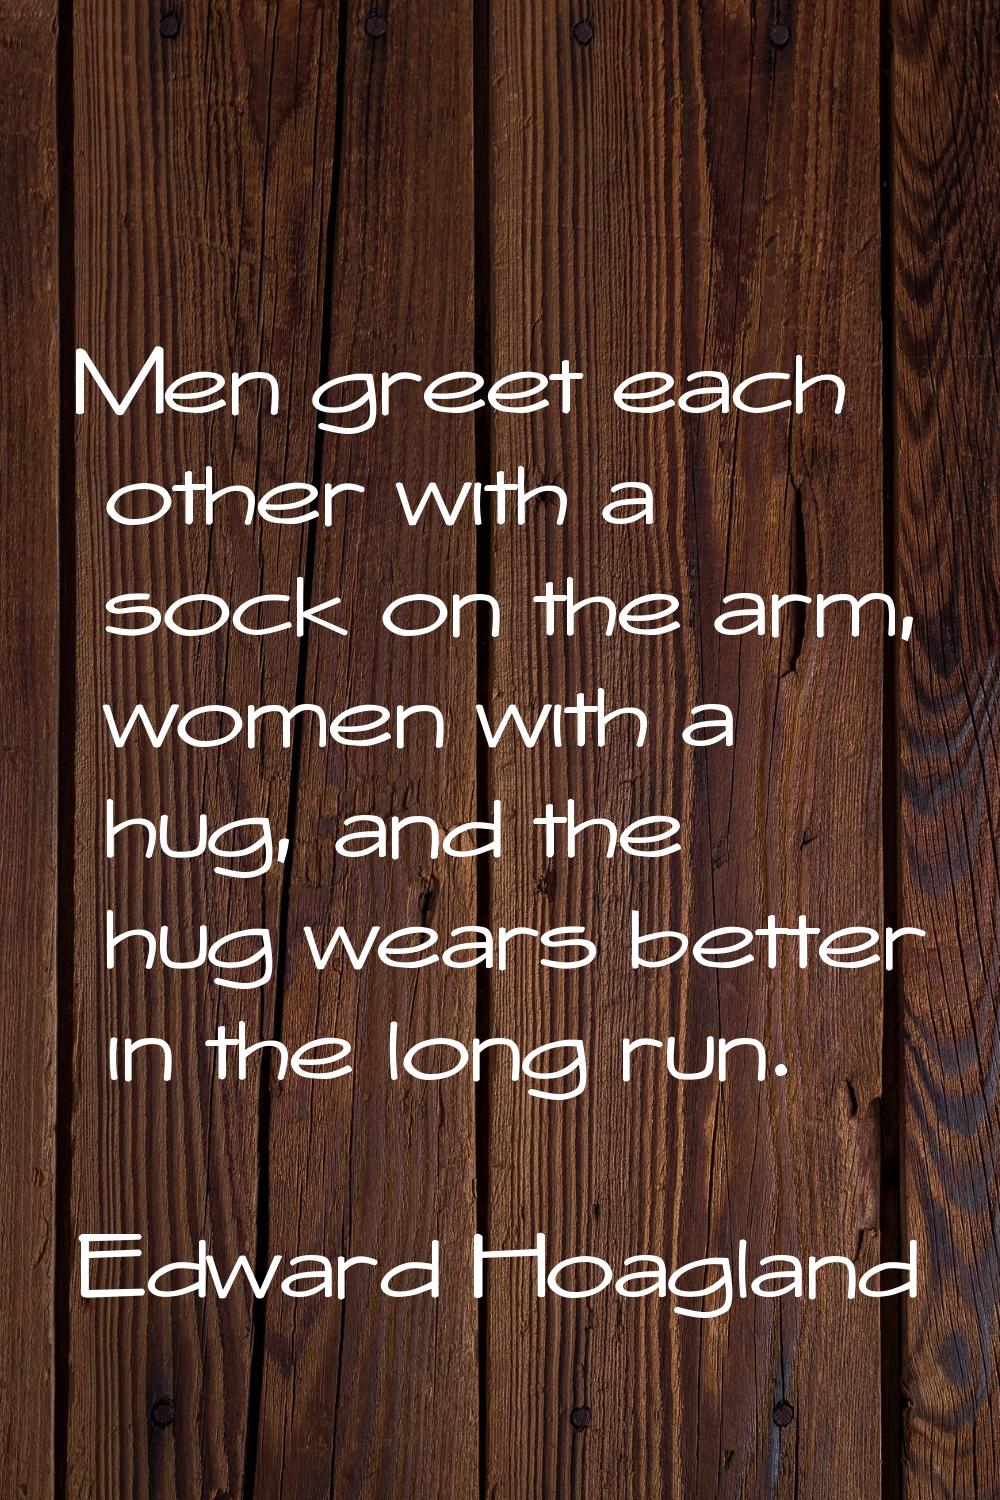 Men greet each other with a sock on the arm, women with a hug, and the hug wears better in the long